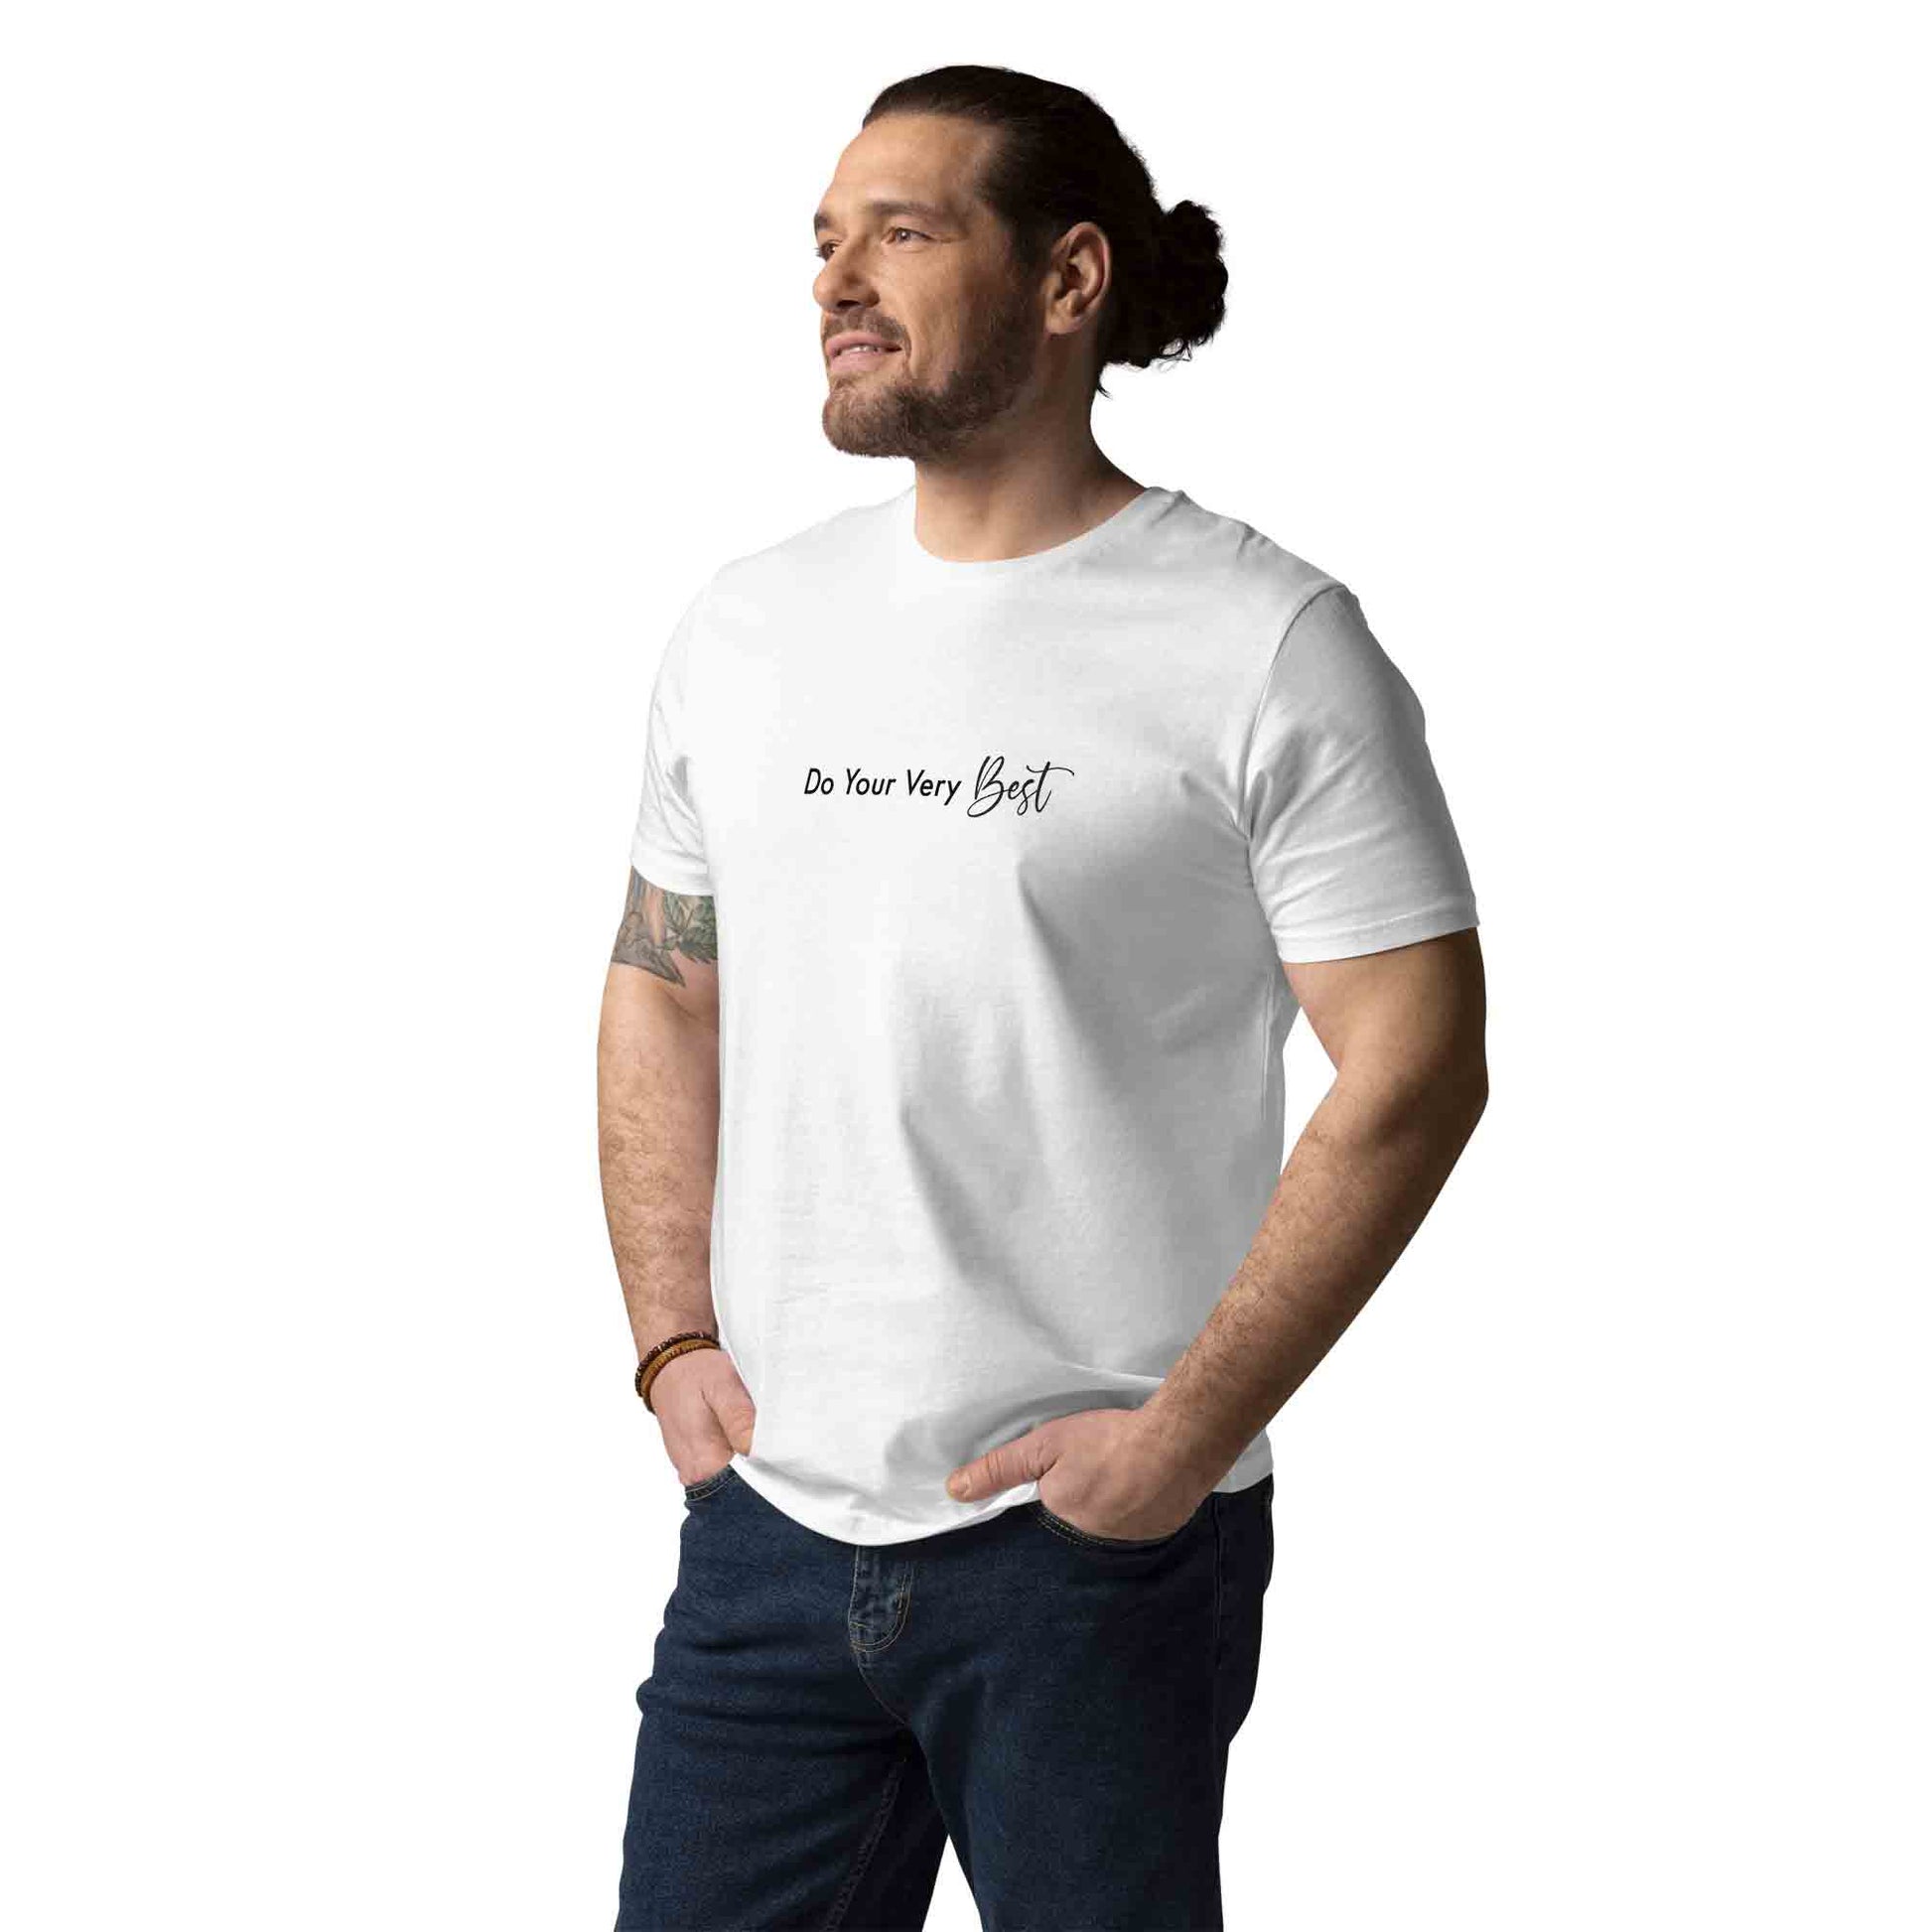 Men white 100% organic cotton t-shirt with motivational quote, "Do Your Very Best."